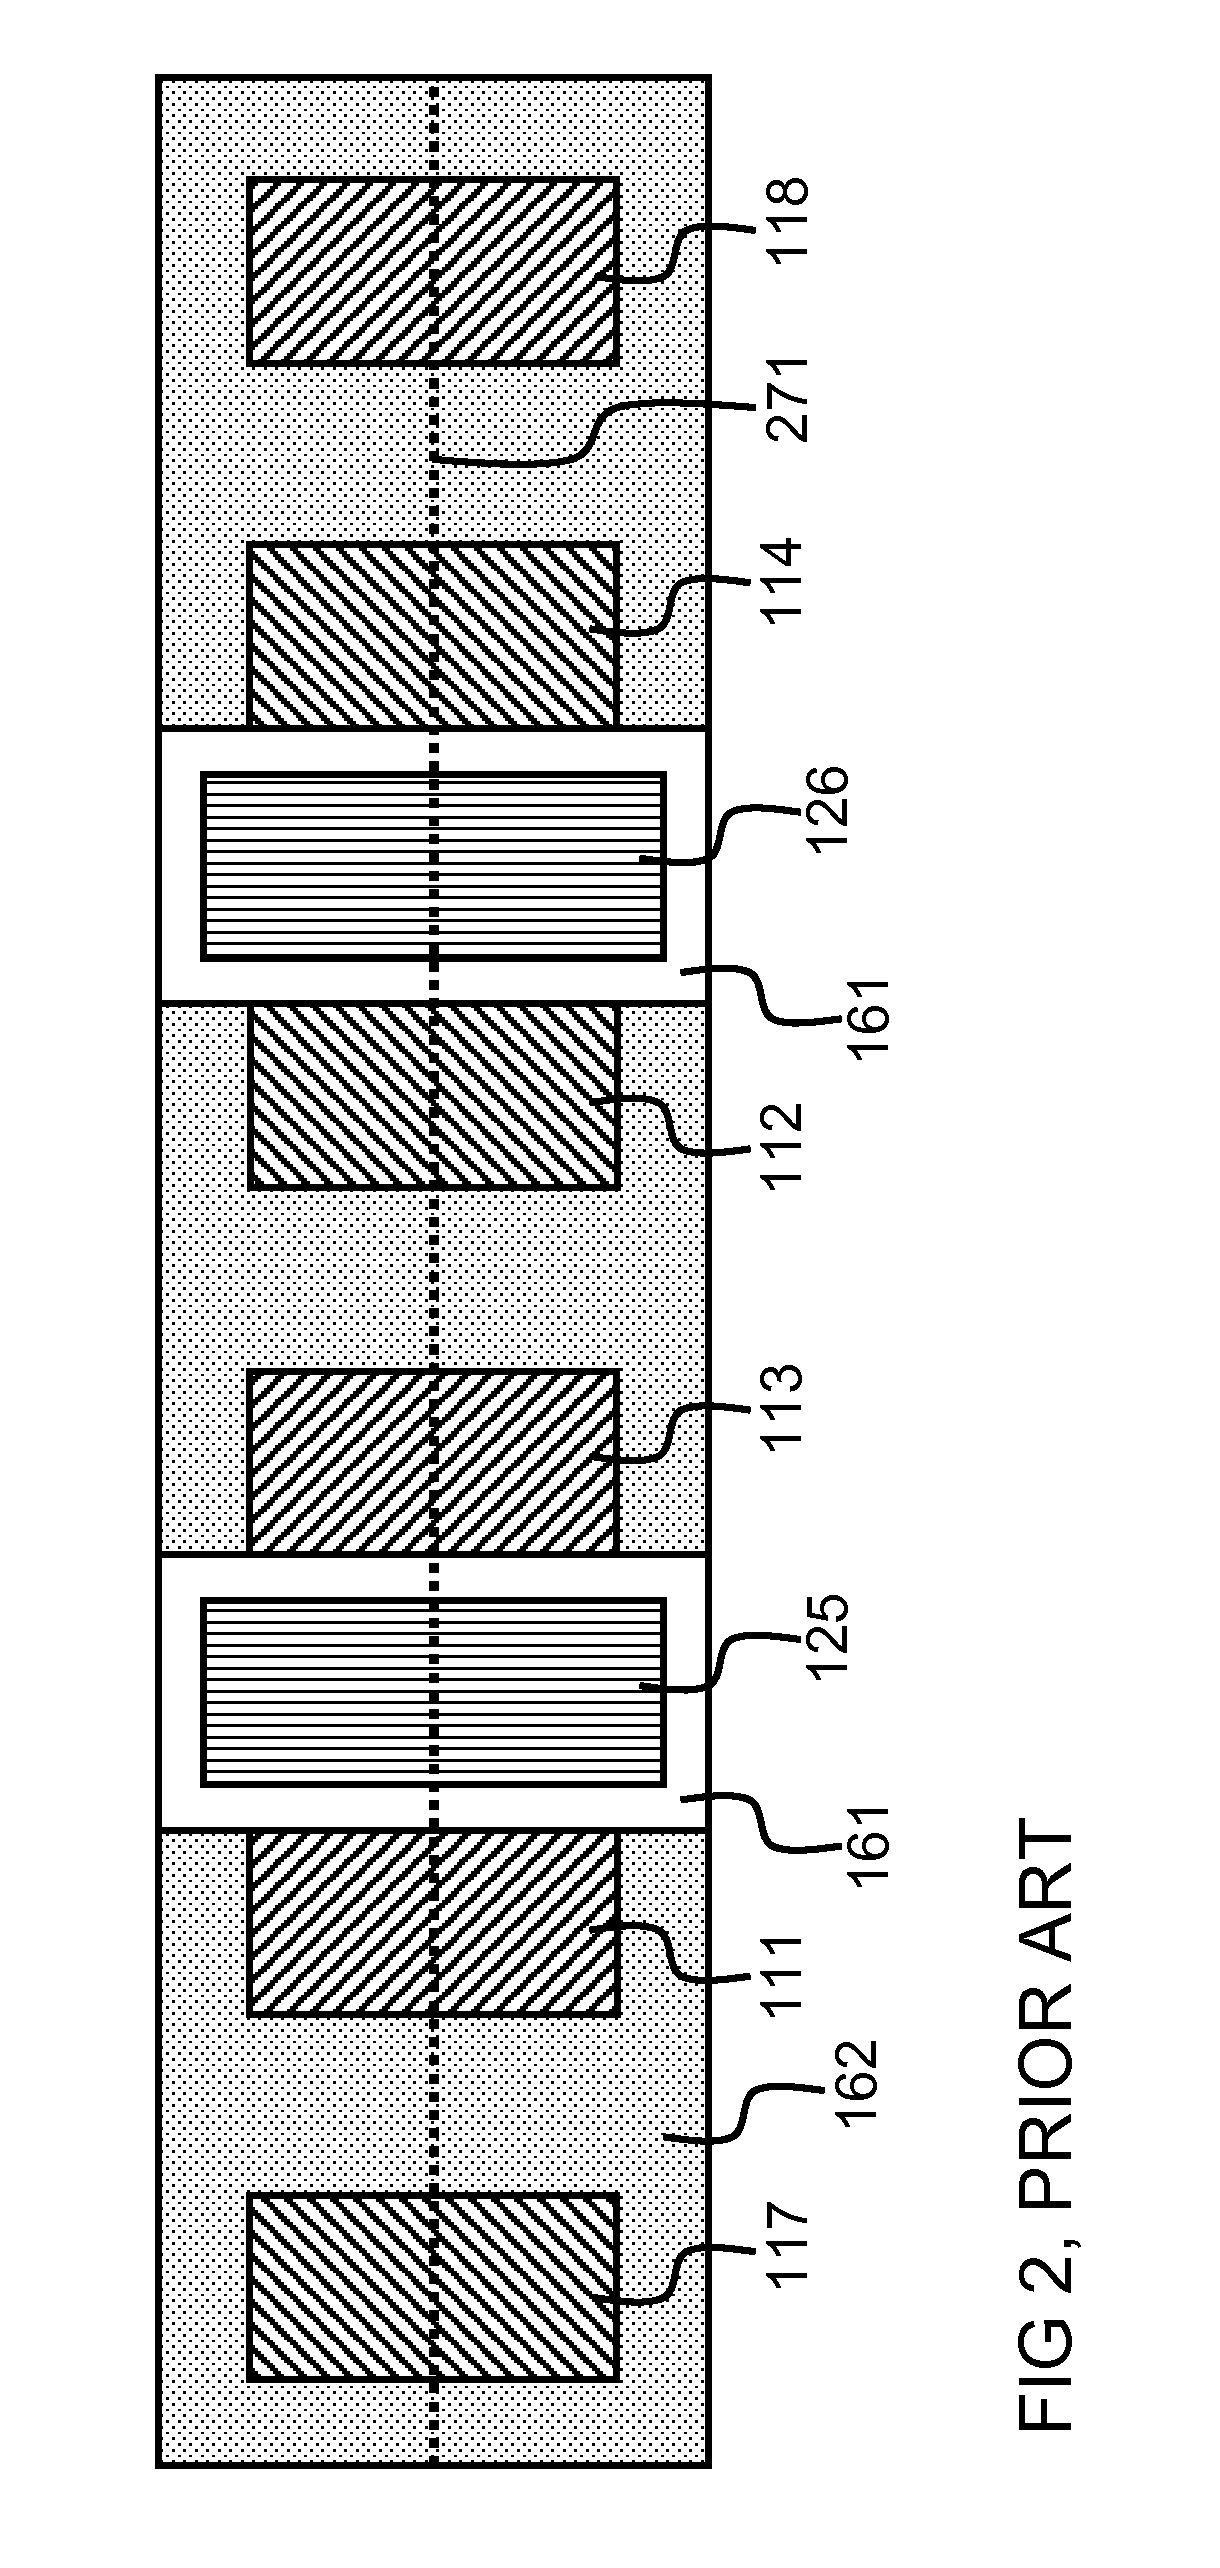 A semiconductor logic element and logic circuitries